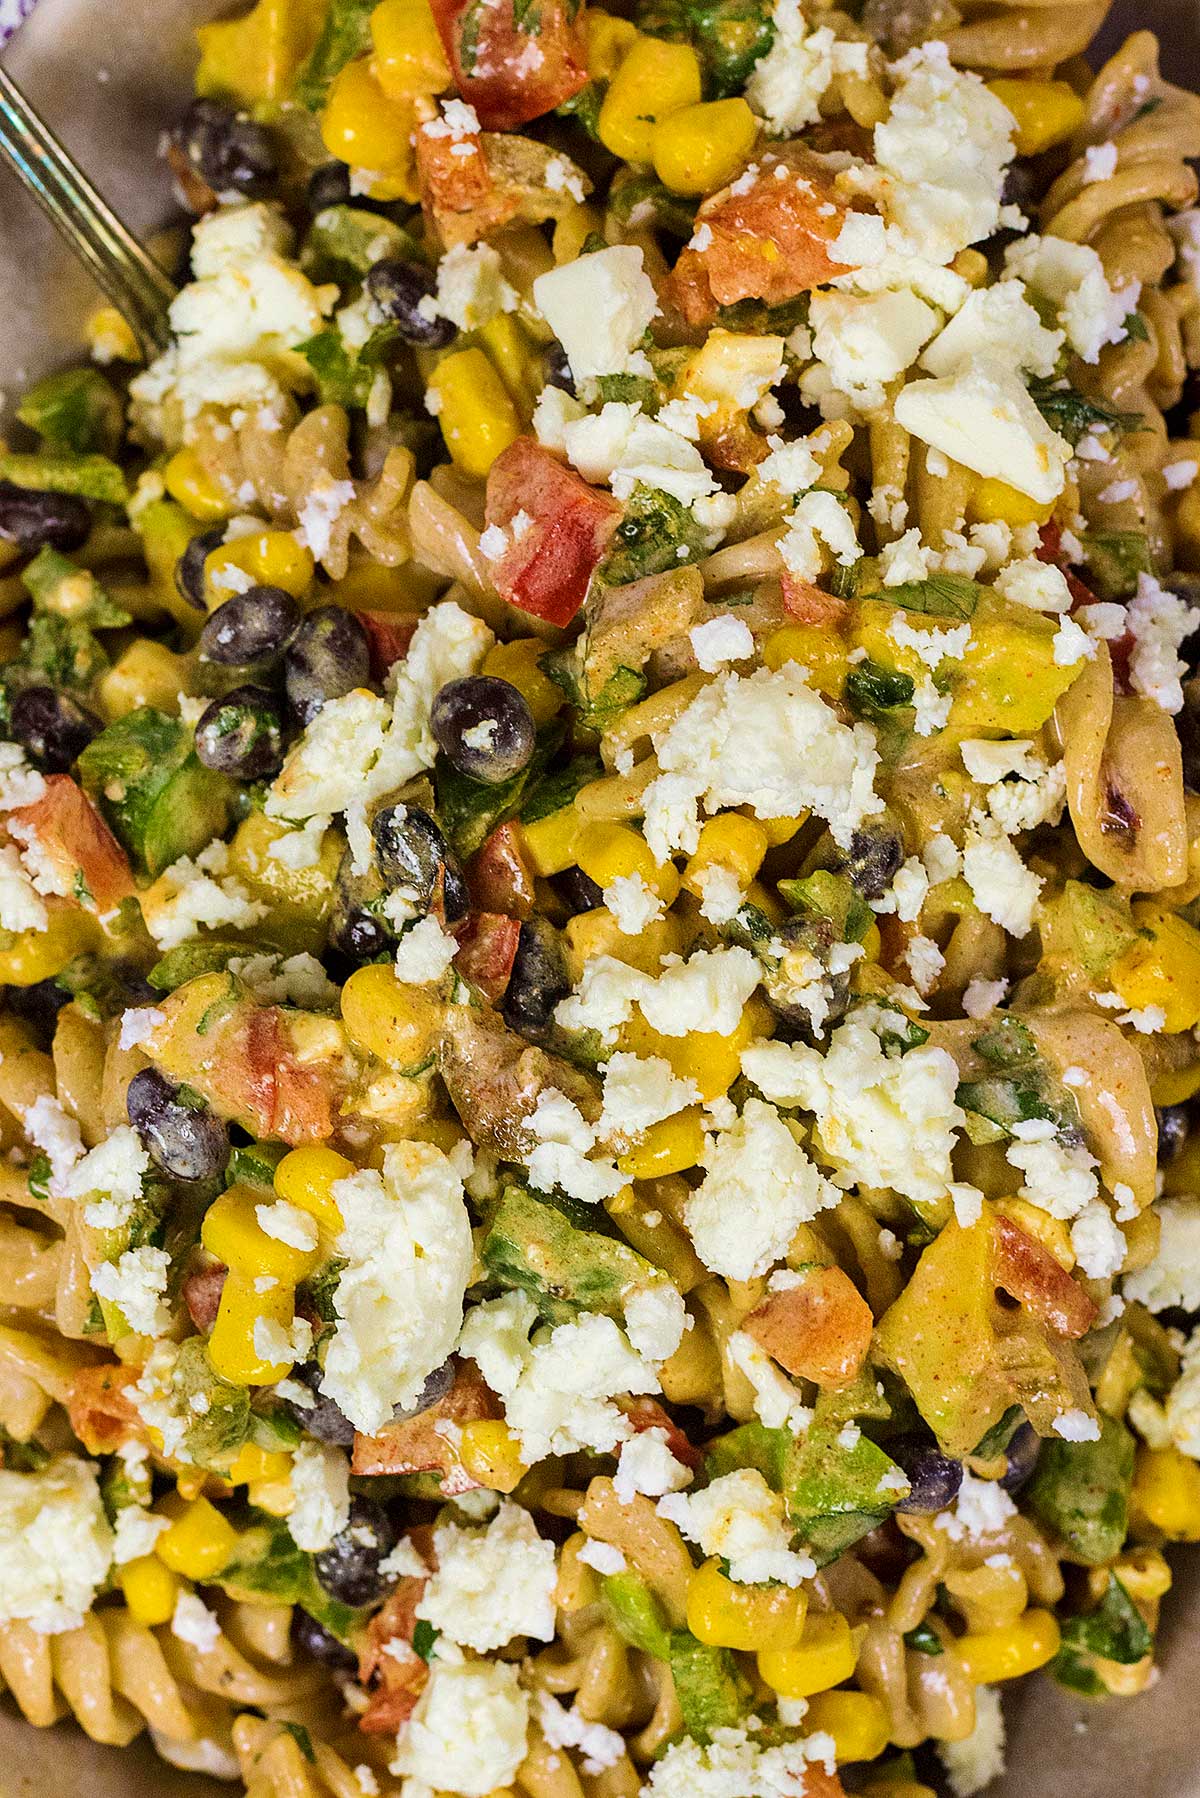 Cooked pasta mixed with corn, black beans, chopped peppers and crumbled feta.